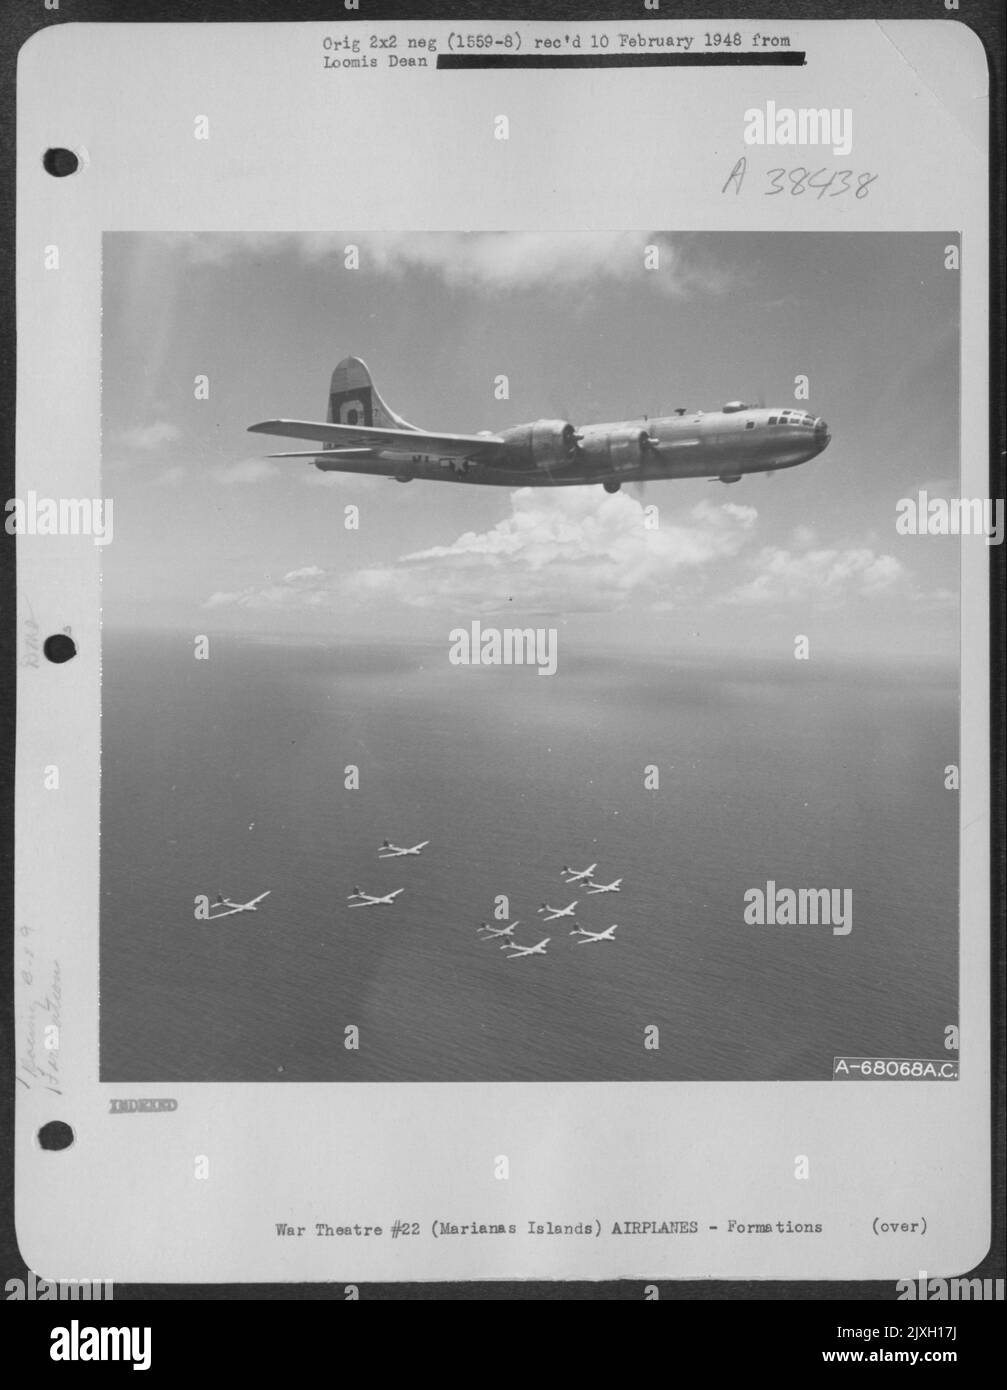 A Formation Of Marianas Islands Based Boeing B-29'S Fly High Above The Pacific. Capable Of Carrying A Larger Bomb Load Farther Than Any Other Plane In World War Ii, The 'Superfortresses'' Brought The War To The Japaneseanese Homeland. Stock Photo